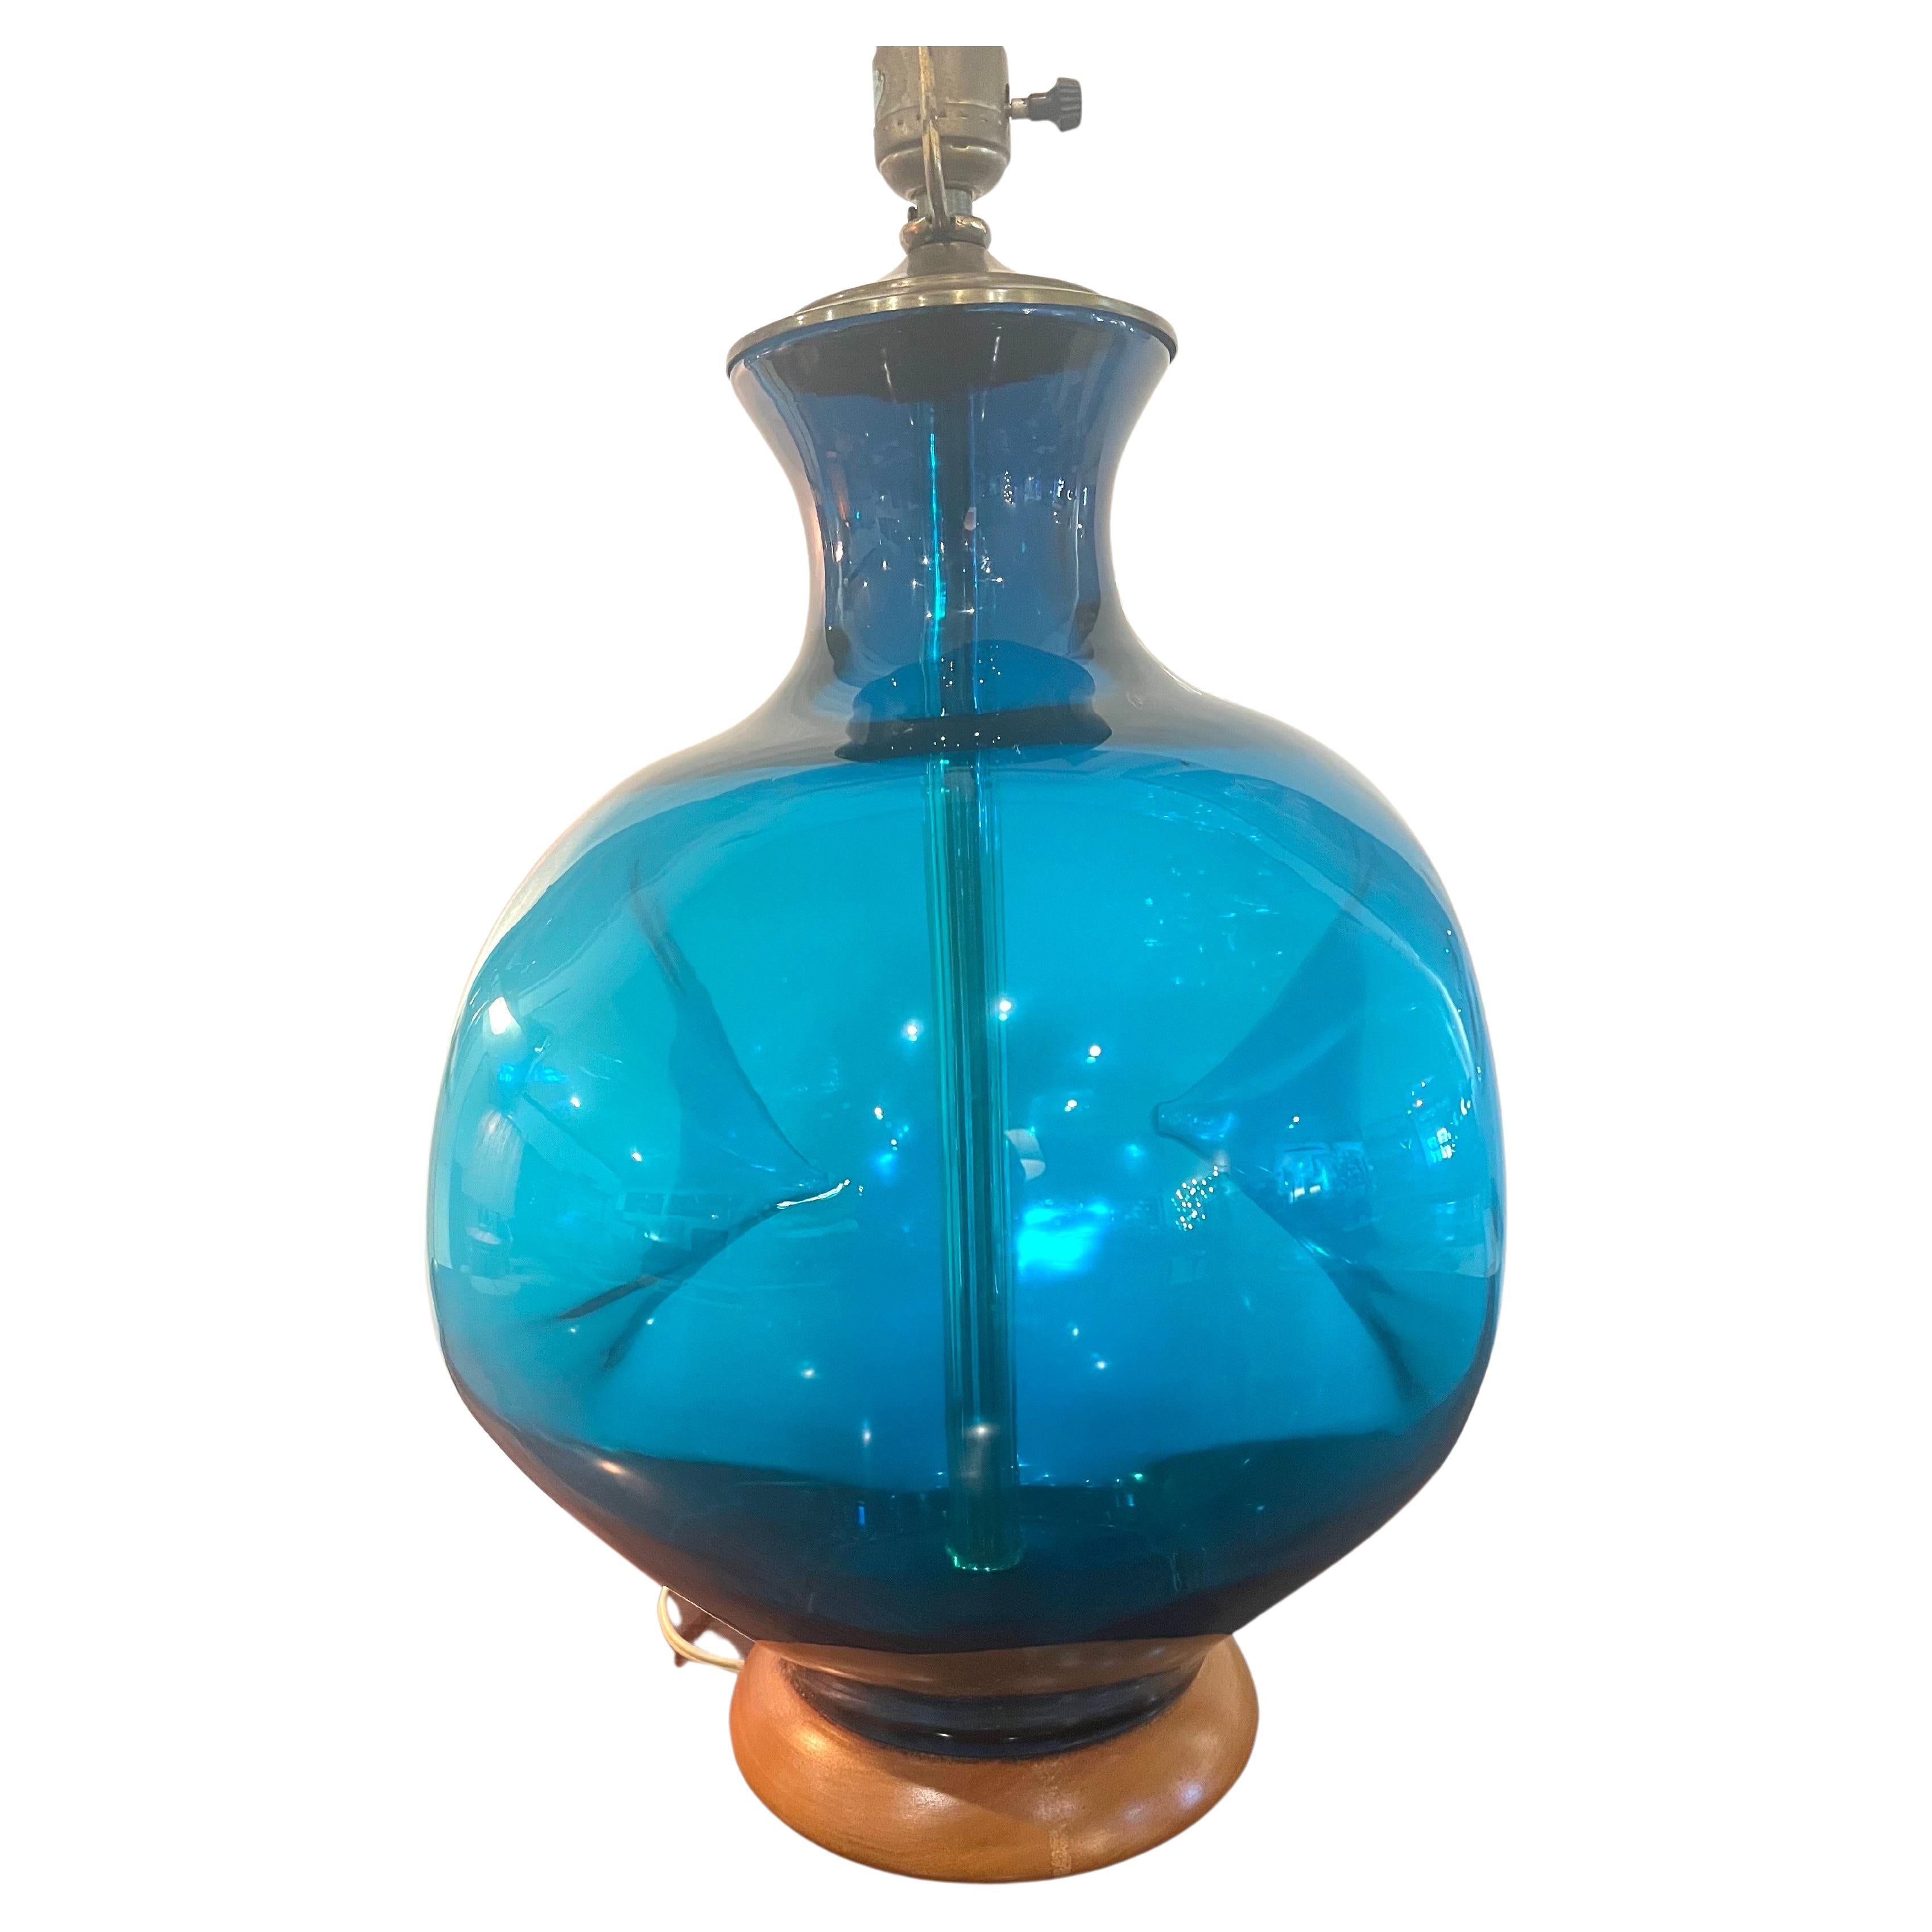 Winslow Andersen for Blenko rare blue glass mouth blown glass table lamp all original no chips or cracks, excellent condition, circa 1950's with solid maple base, beautiful unique striking color,